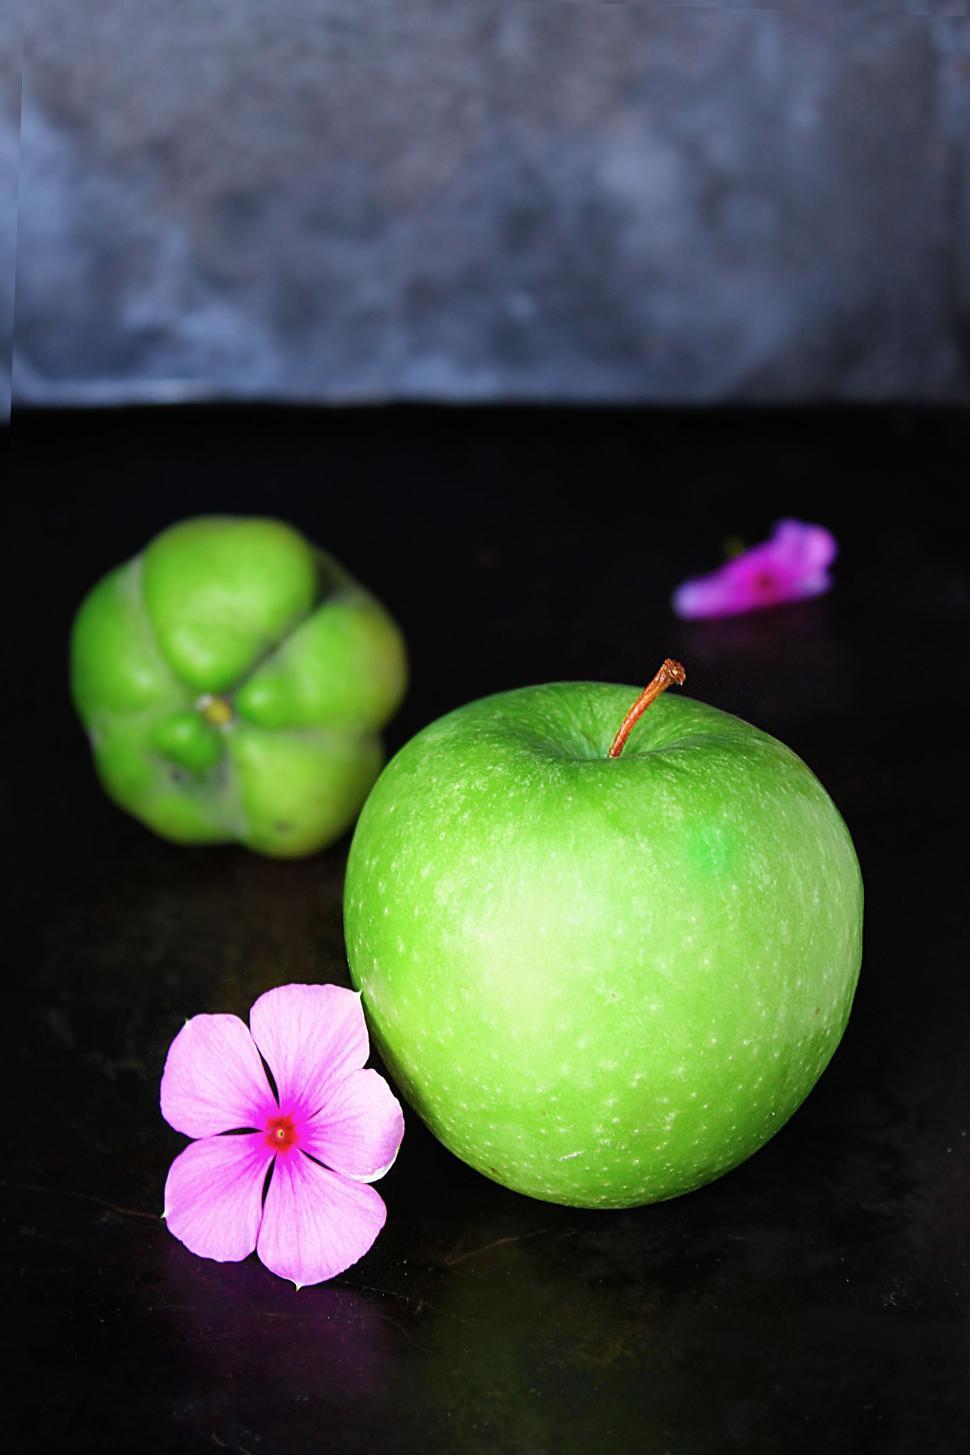 Free Image of Green Apple and Pink Flower 